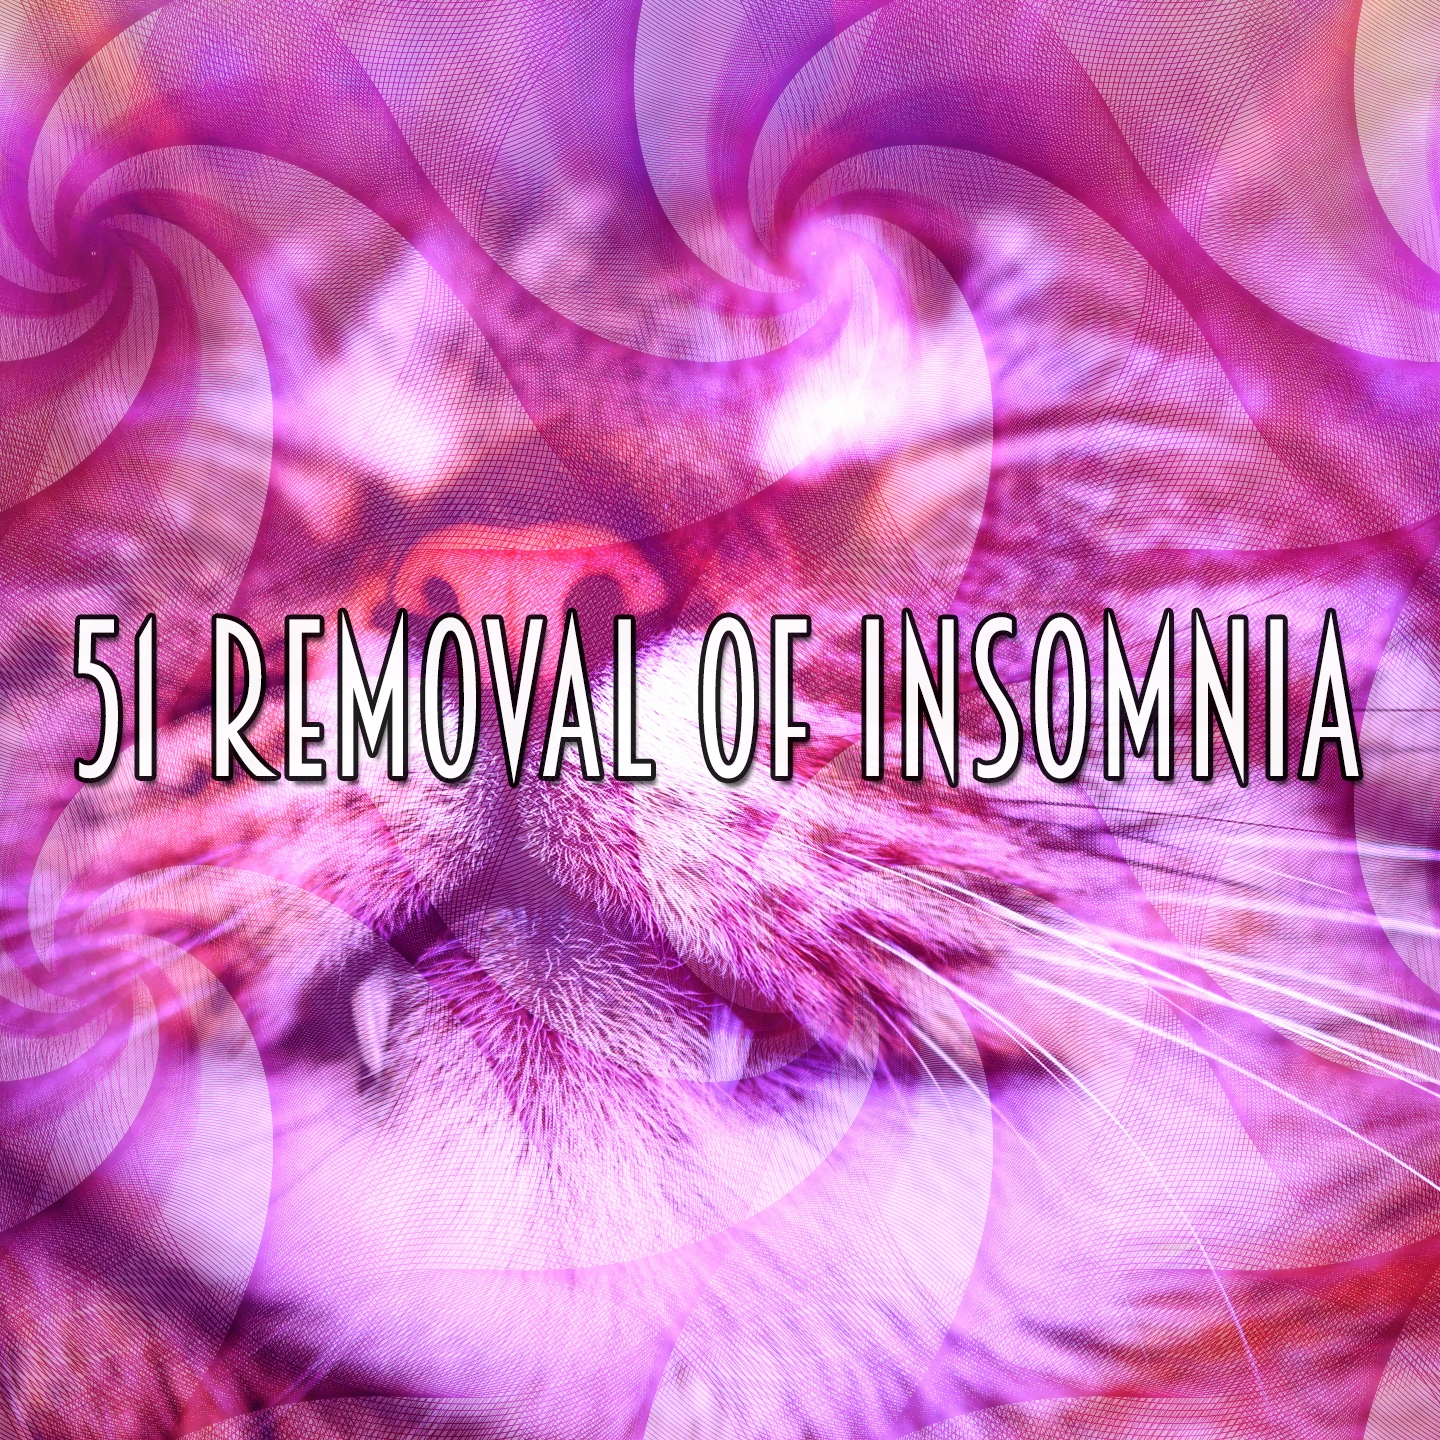 51 Removal Of Insomnia